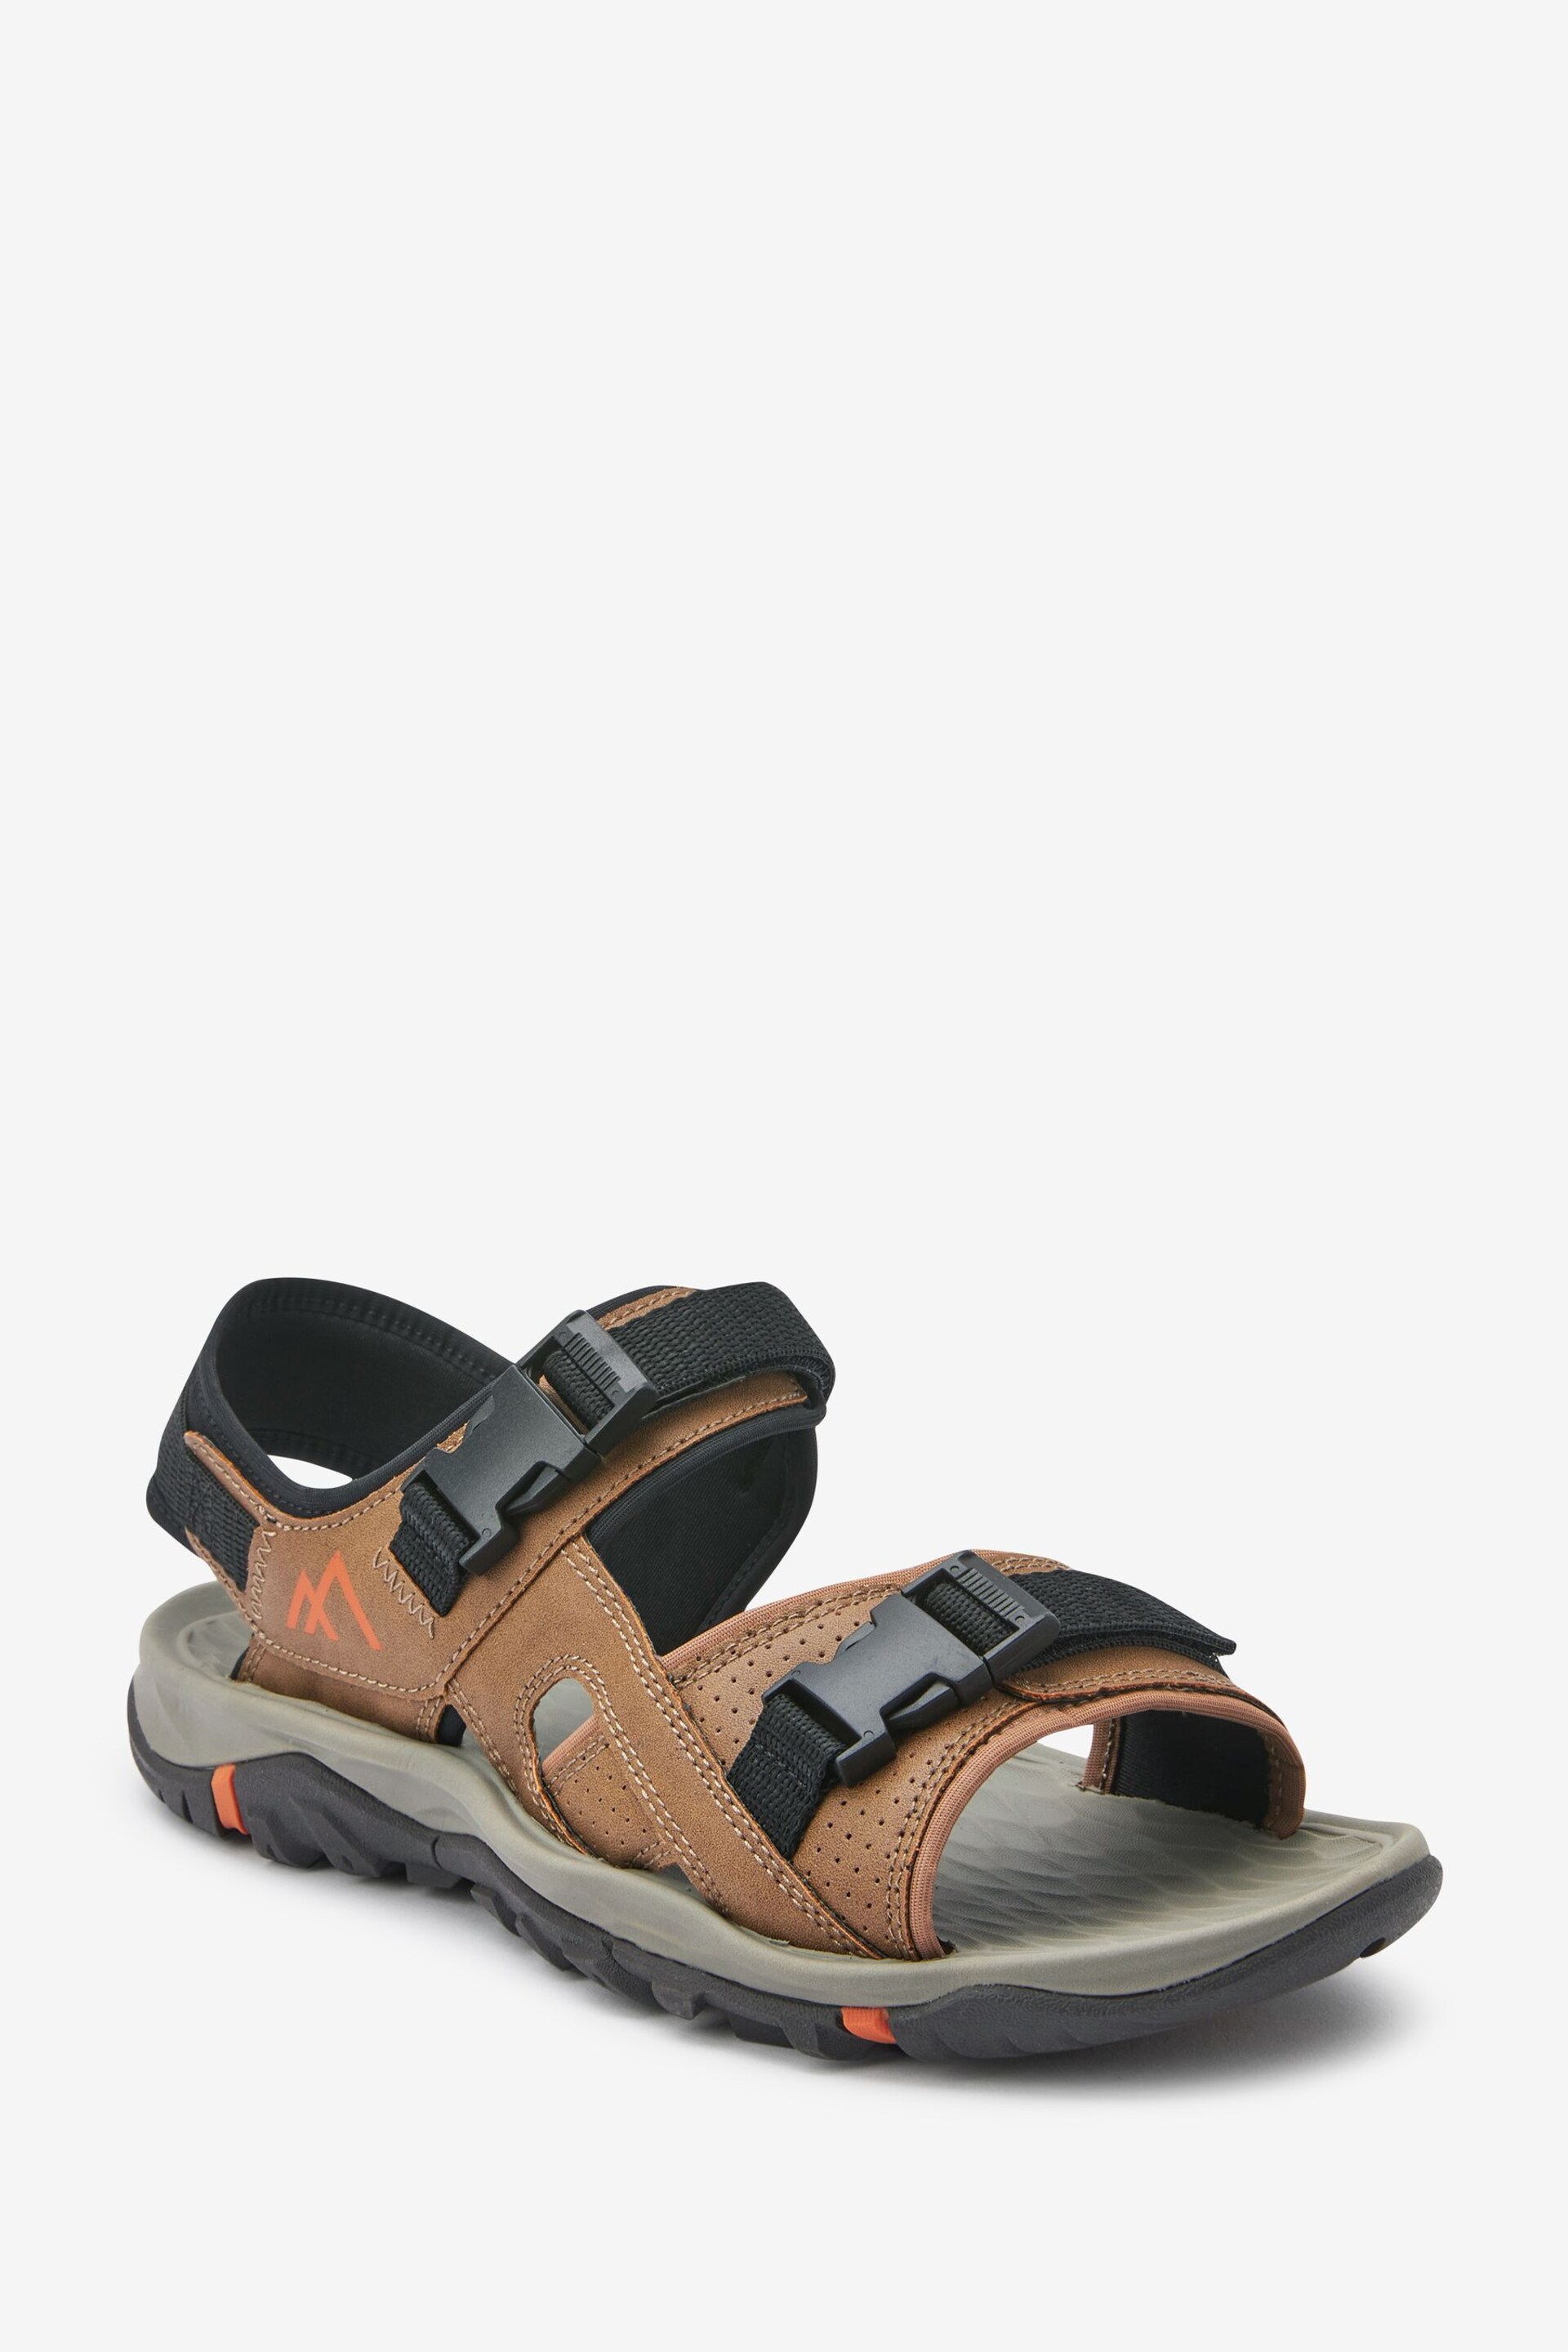 Tan Brown Sports Sandals - Image 3 of 5